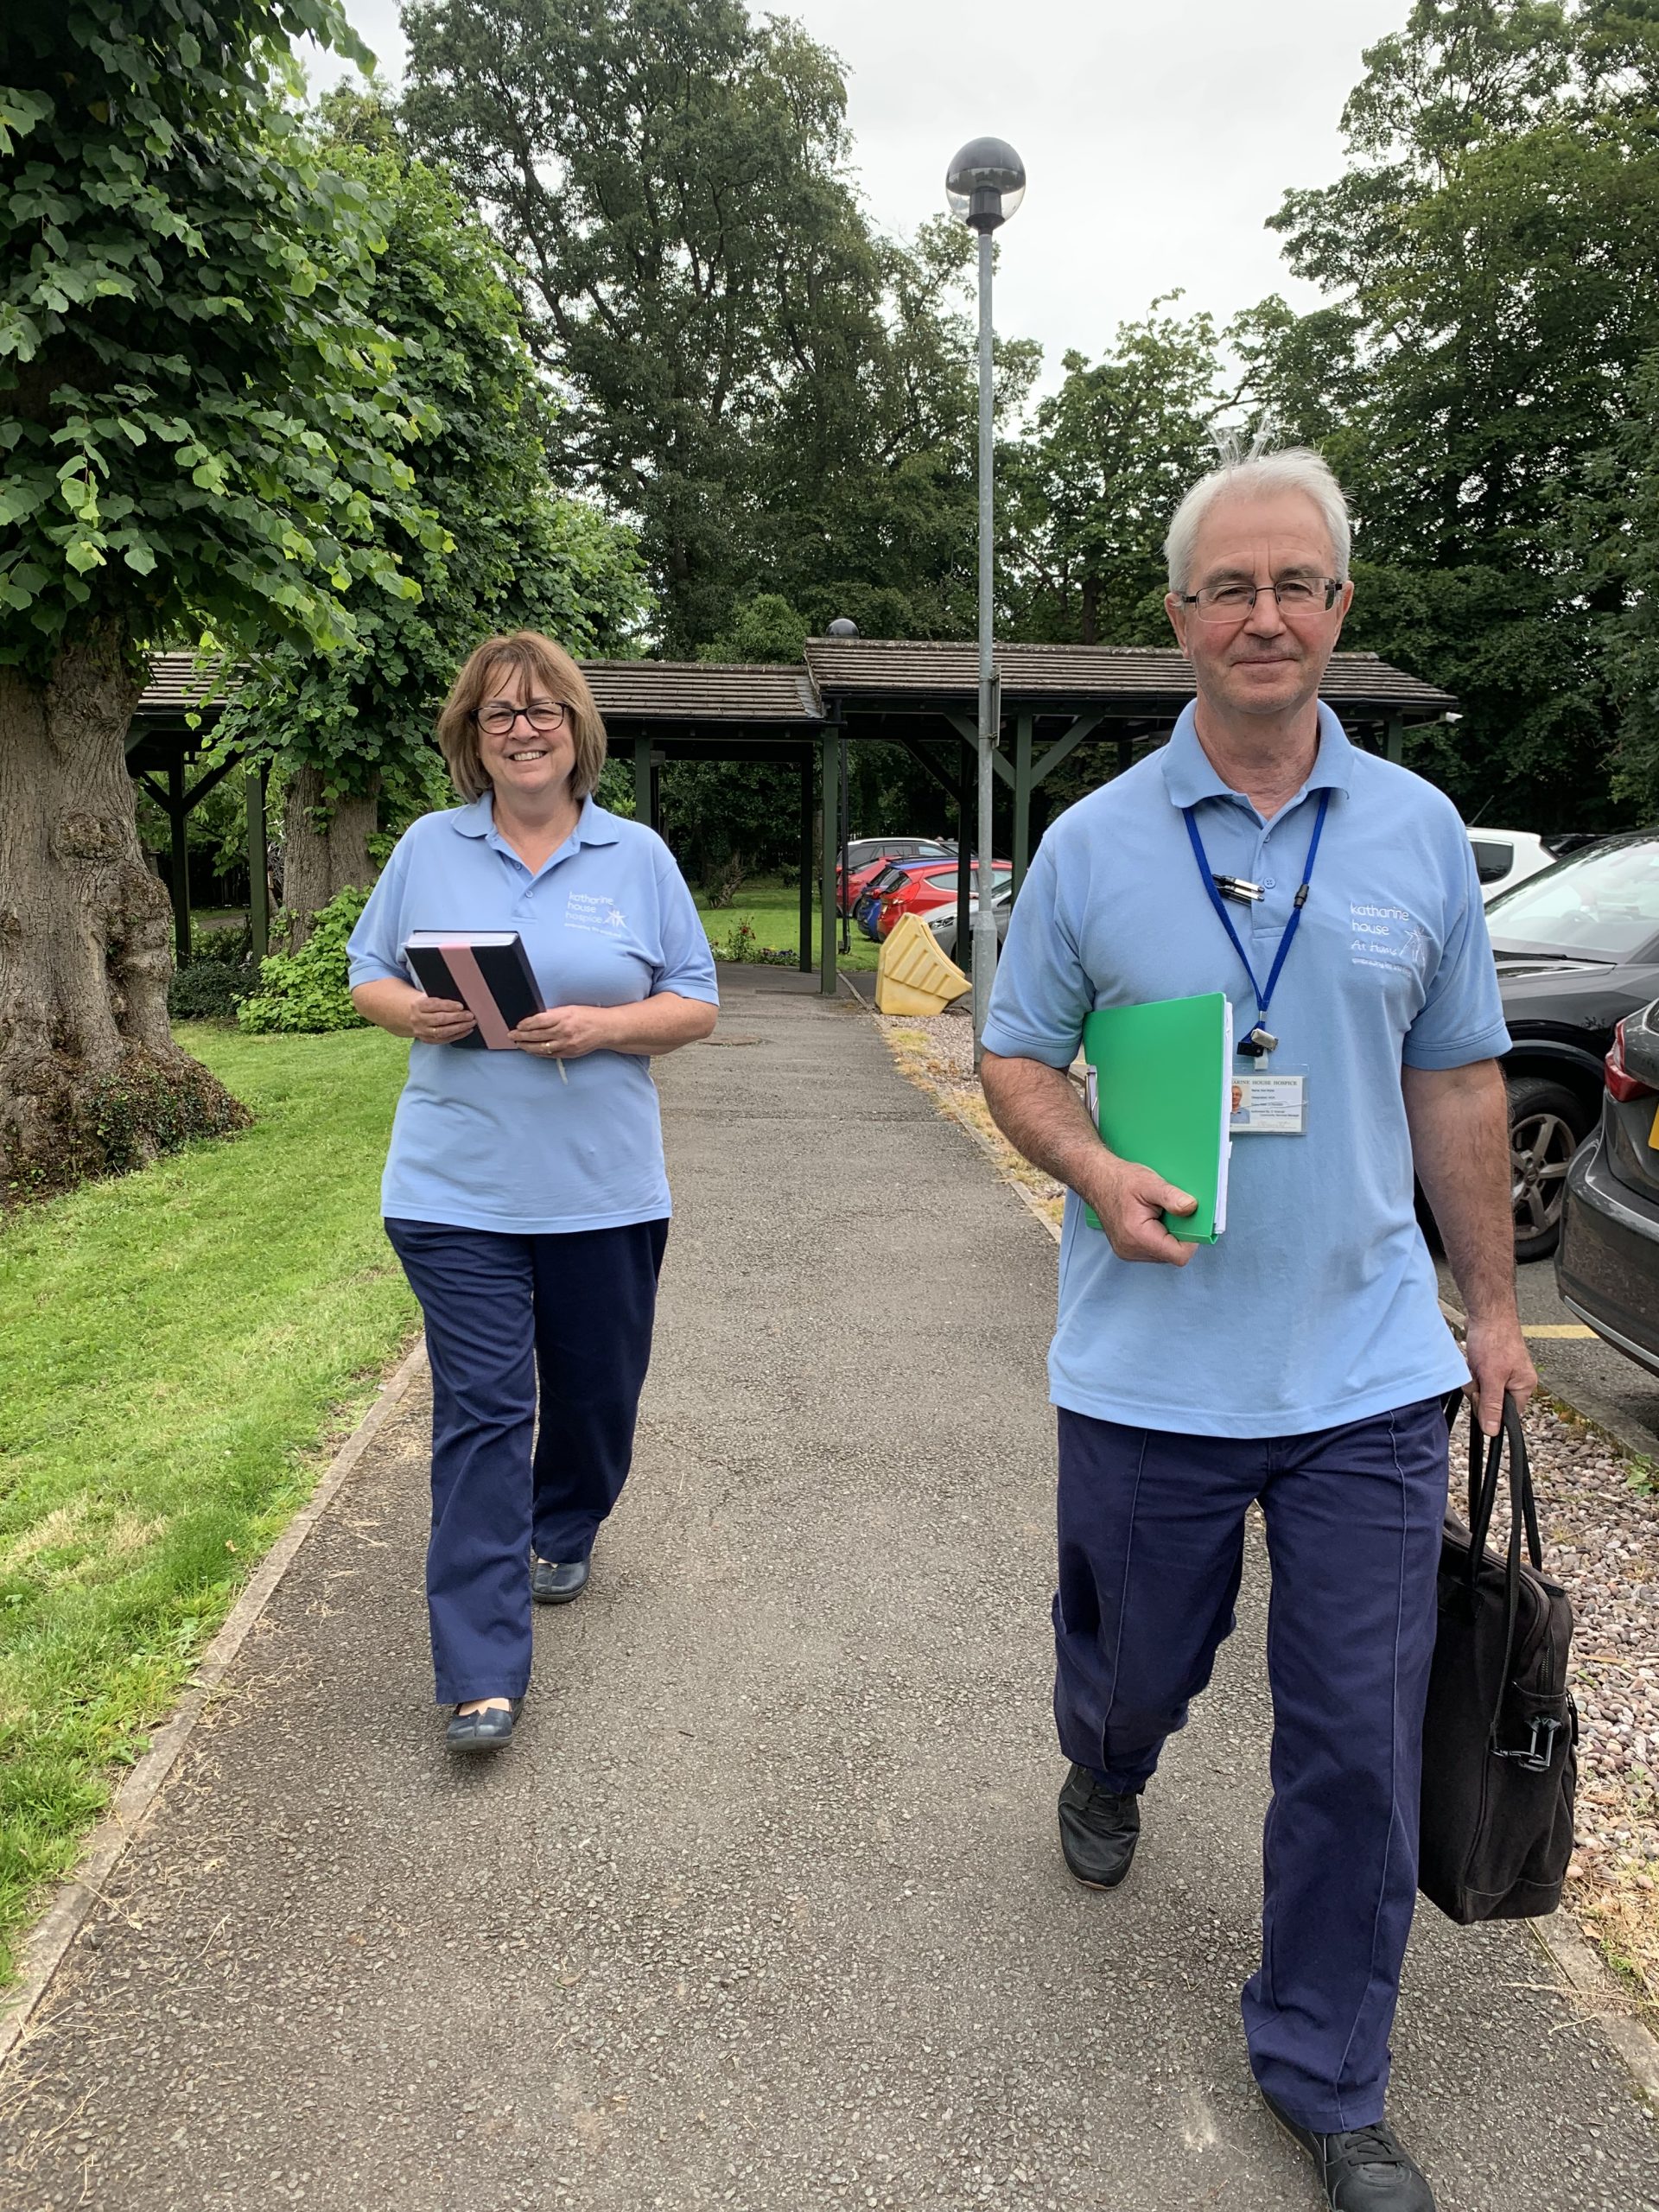 Tracey and Ken on their way to visit a patient in their home.